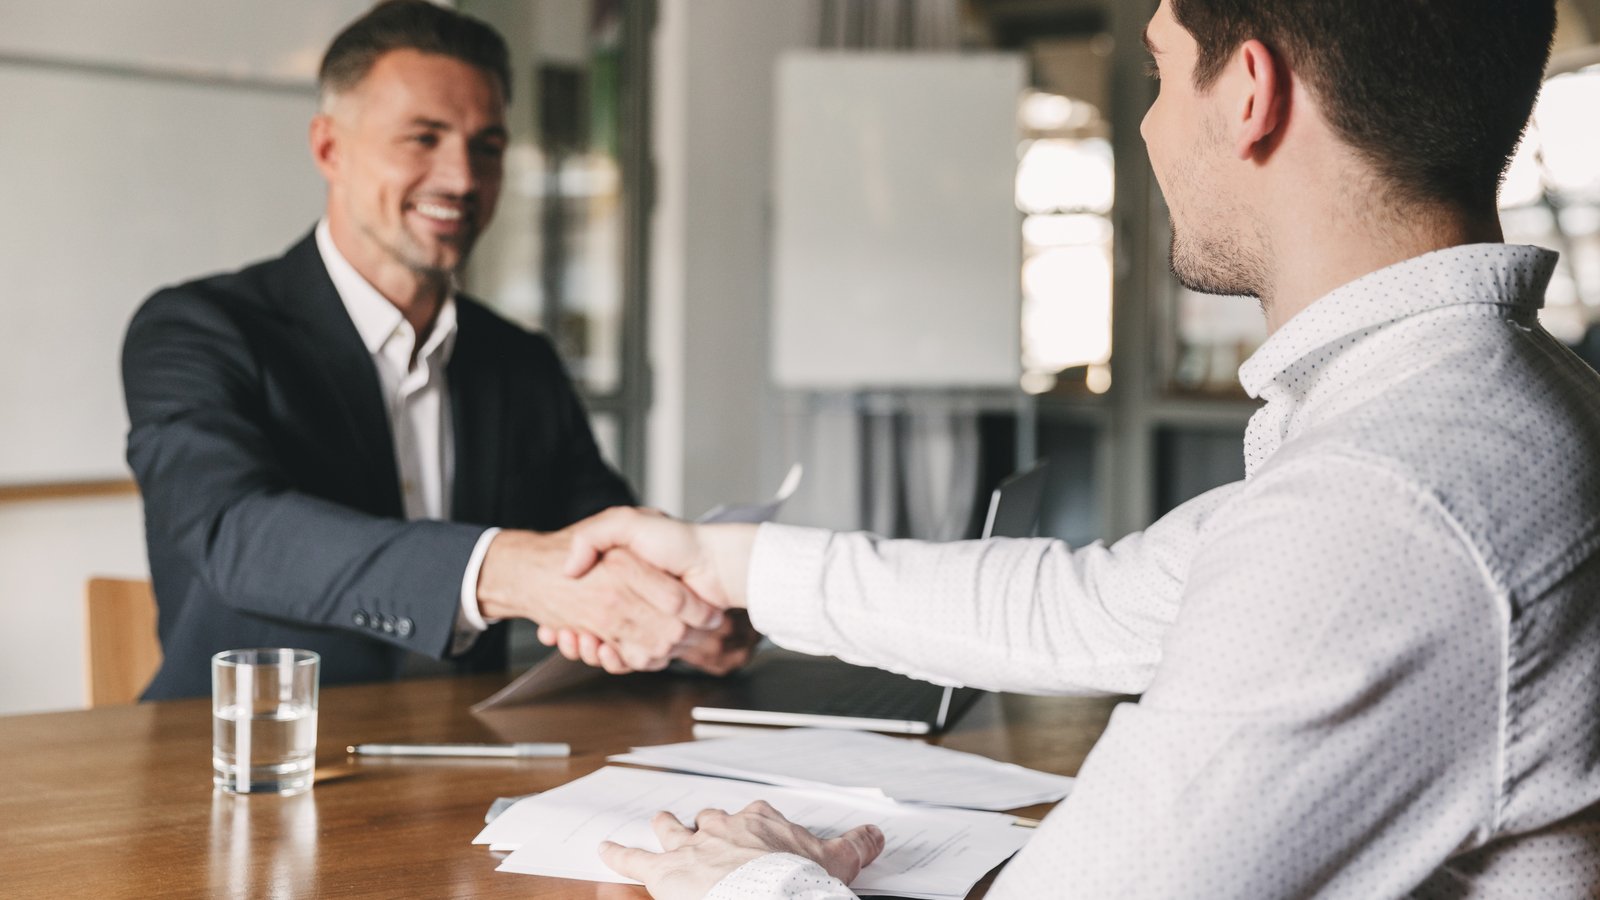 7 Simple tips to make great first impression at interviews